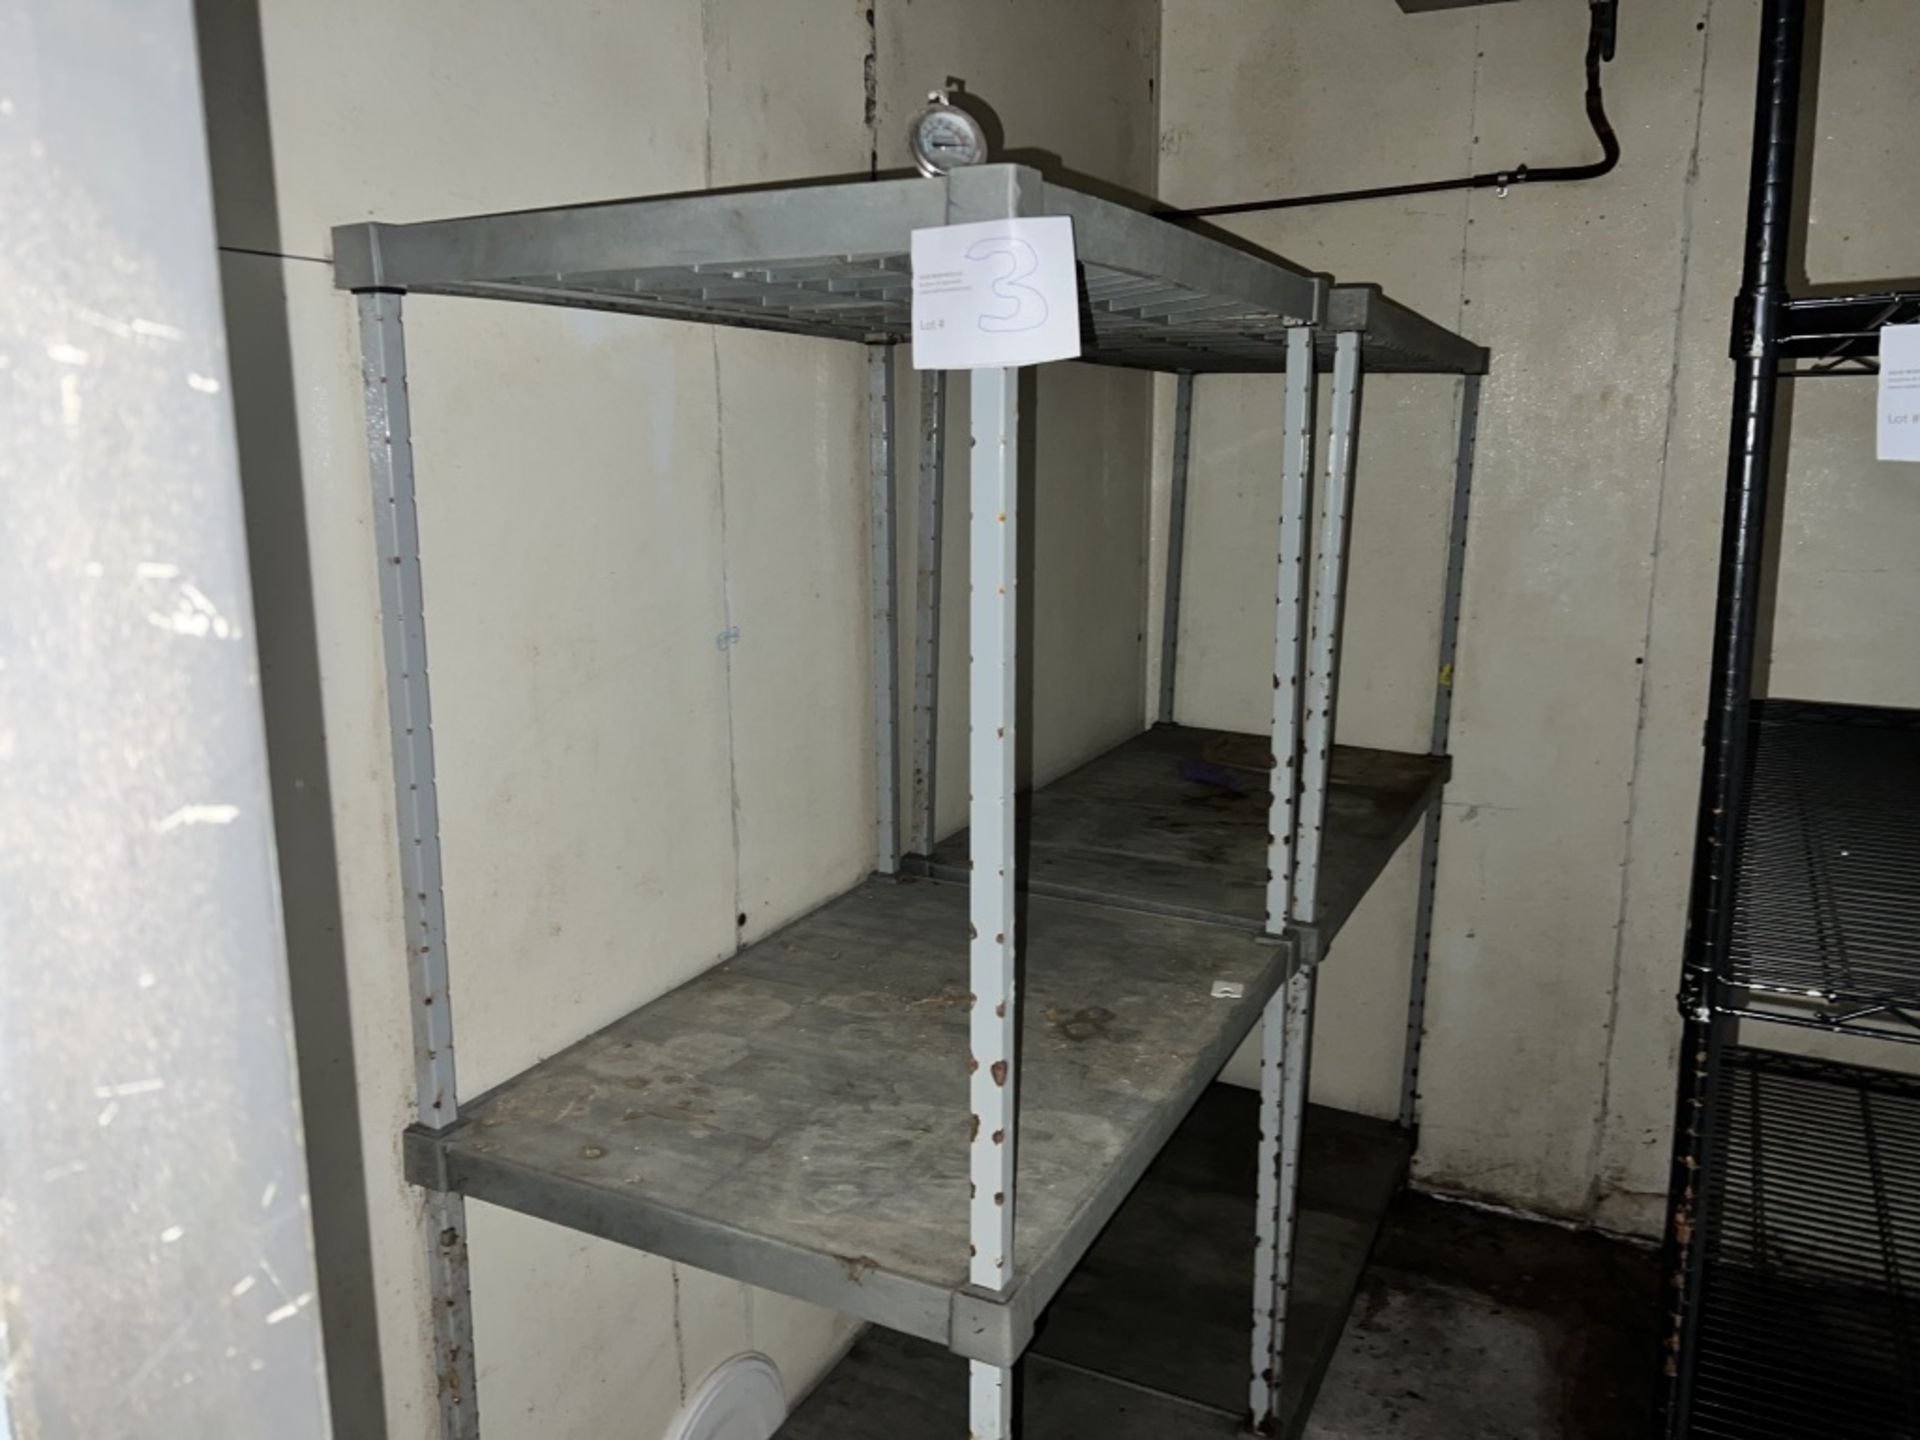 Lot of: (1) 3' wide, 3-tier metal shelving unit and (1) 4' wide, 3-tier metal shelving unit. - Image 4 of 5